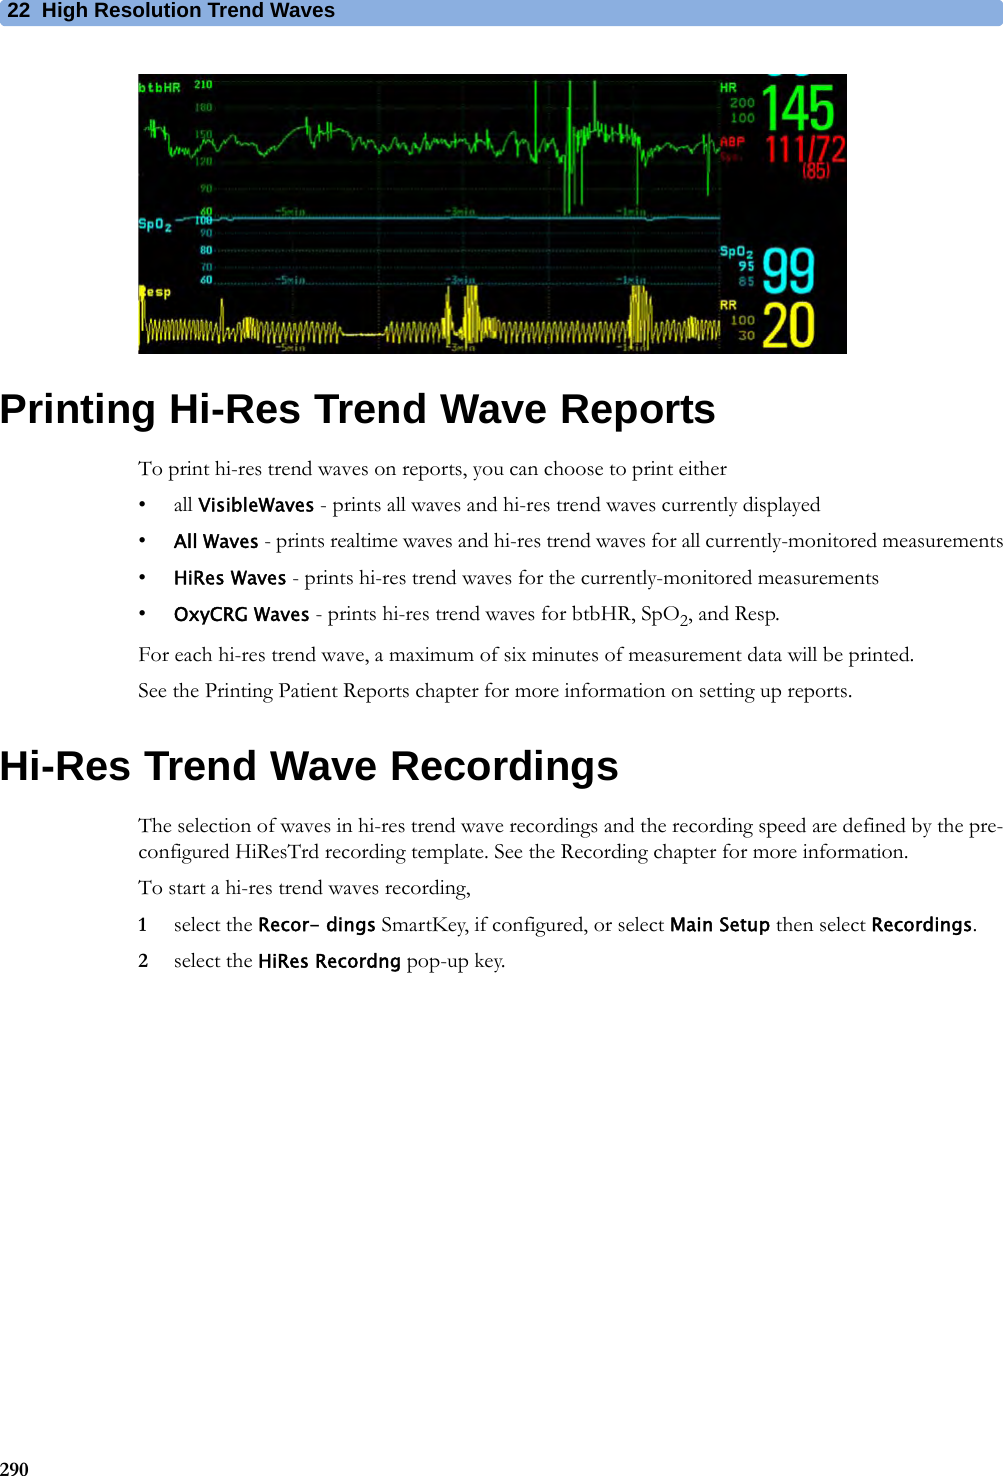 22 High Resolution Trend Waves290Printing Hi-Res Trend Wave ReportsTo print hi-res trend waves on reports, you can choose to print either• all VisibleWaves - prints all waves and hi-res trend waves currently displayed•All Waves - prints realtime waves and hi-res trend waves for all currently-monitored measurements•HiRes Waves - prints hi-res trend waves for the currently-monitored measurements•OxyCRG Waves - prints hi-res trend waves for btbHR, SpO2, and Resp.For each hi-res trend wave, a maximum of six minutes of measurement data will be printed.See the Printing Patient Reports chapter for more information on setting up reports.Hi-Res Trend Wave RecordingsThe selection of waves in hi-res trend wave recordings and the recording speed are defined by the pre-configured HiResTrd recording template. See the Recording chapter for more information.To start a hi-res trend waves recording,1select the Recor- dings SmartKey, if configured, or select Main Setup then select Recordings.2select the HiRes Recordng pop-up key.